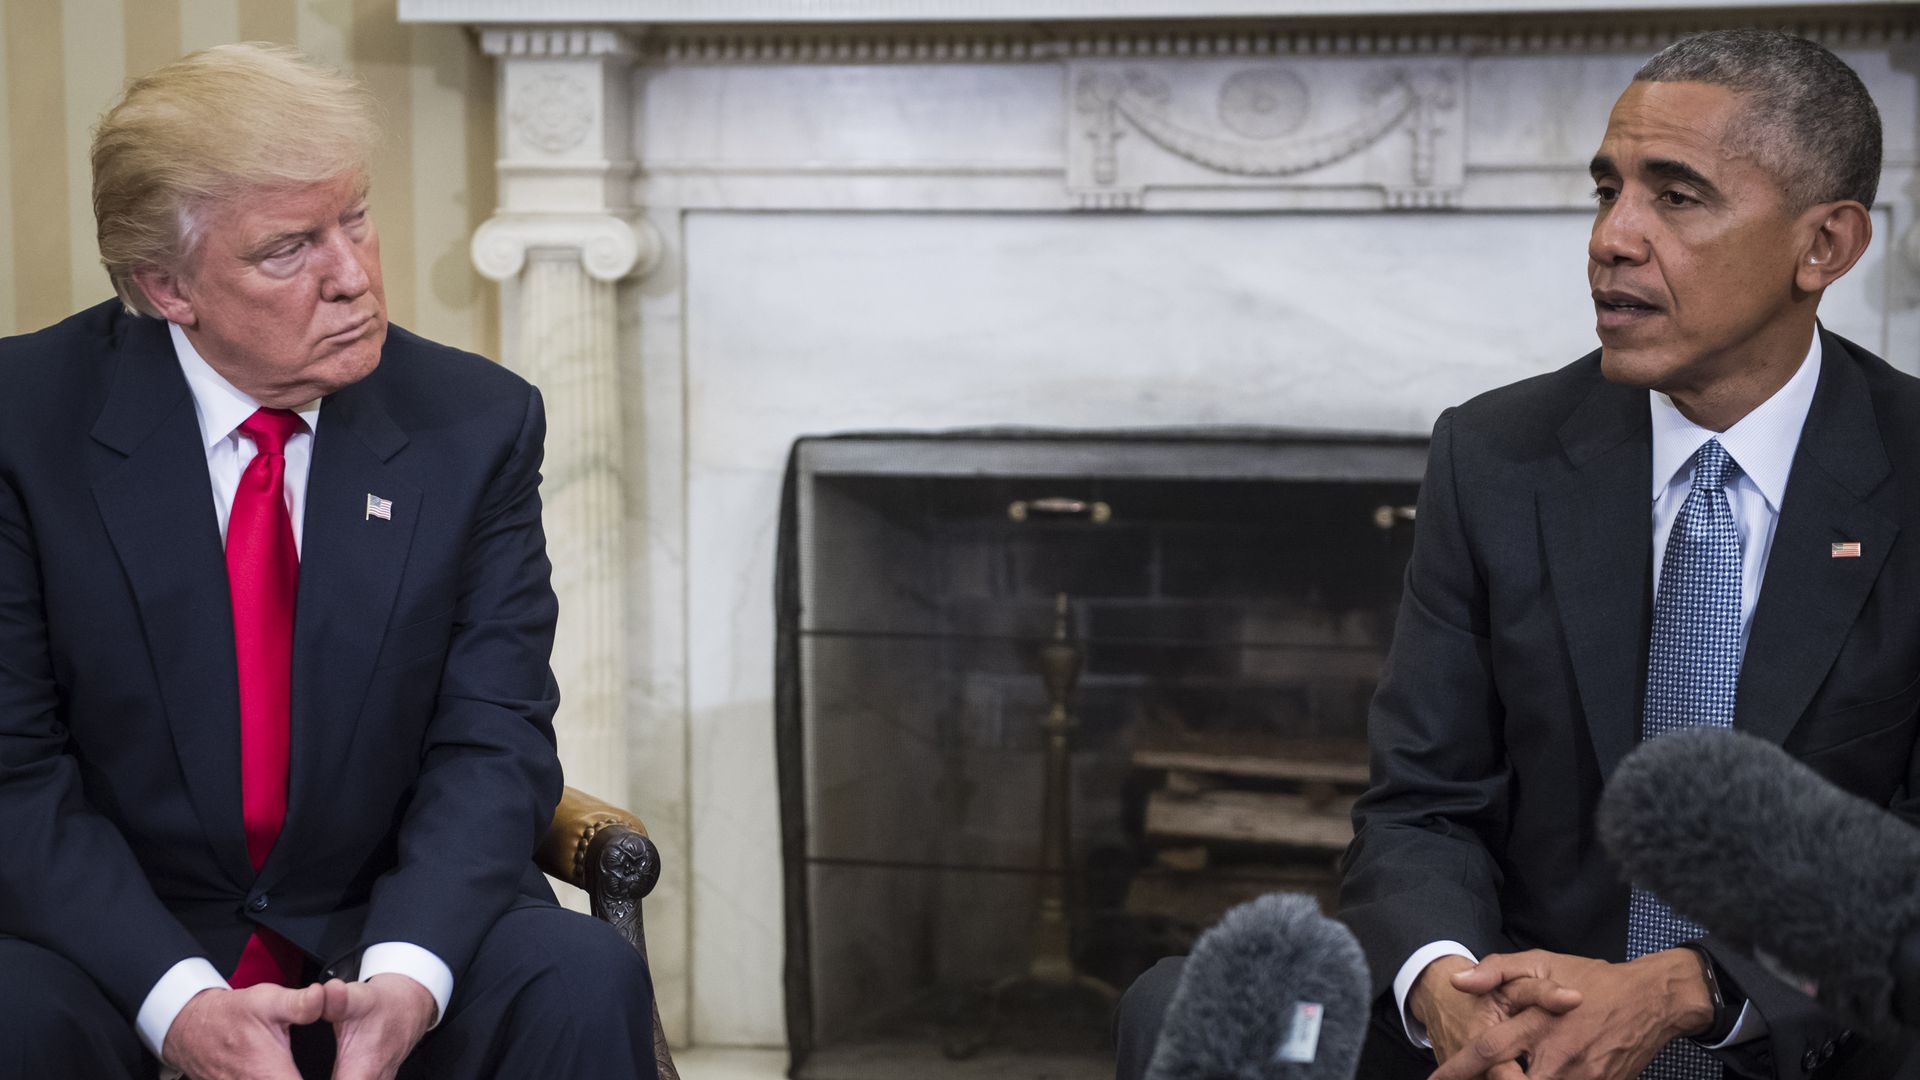 President Barack Obama and President Donald Trump in the Oval office